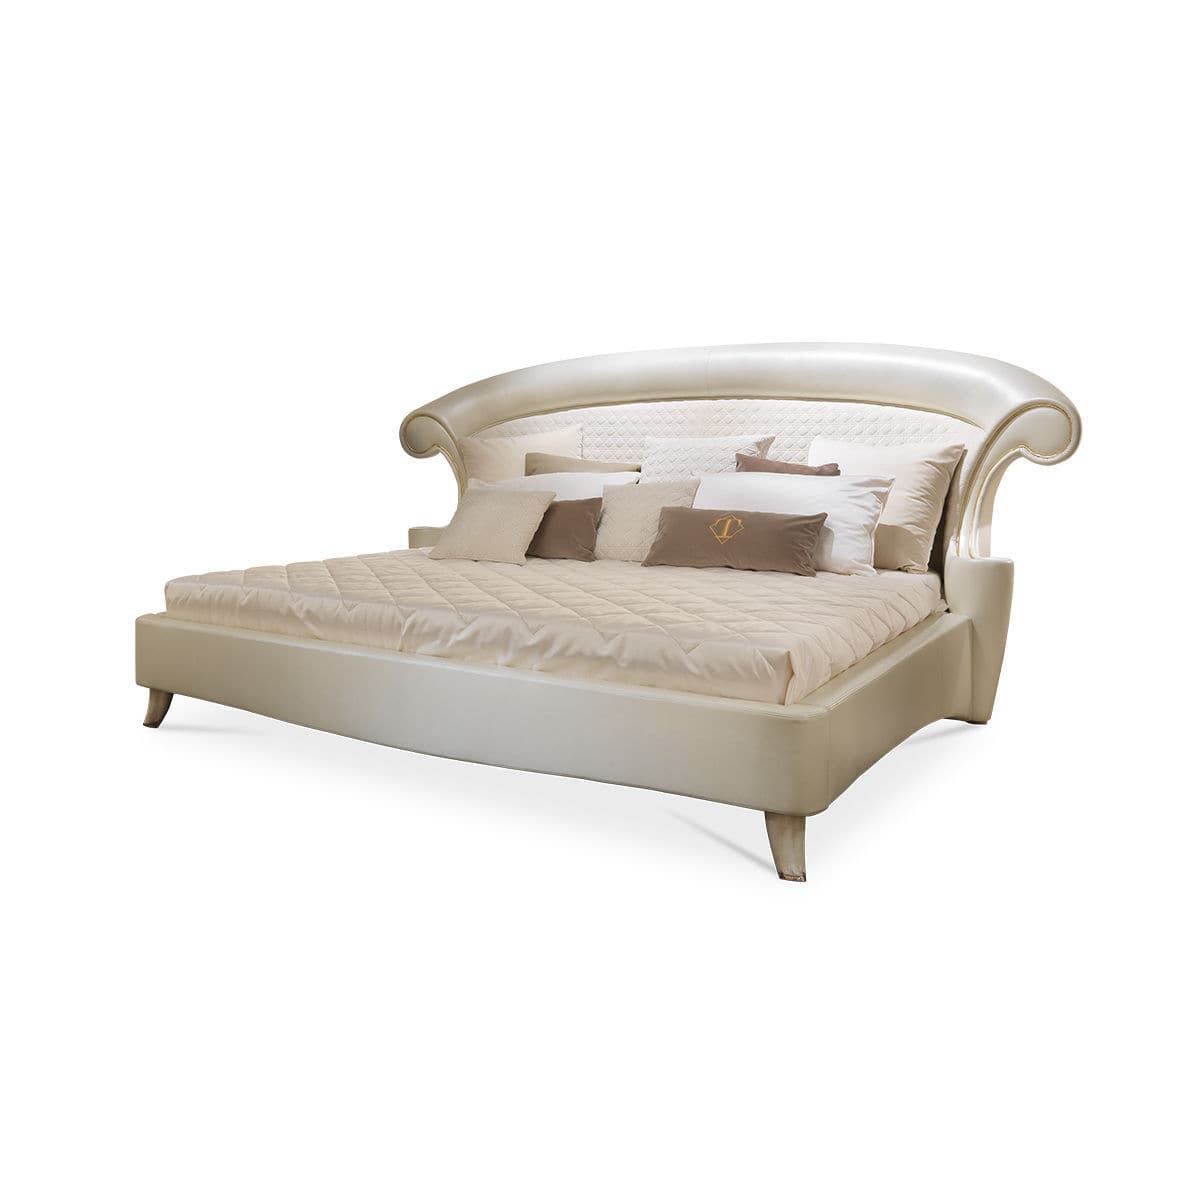 Caractere Bed